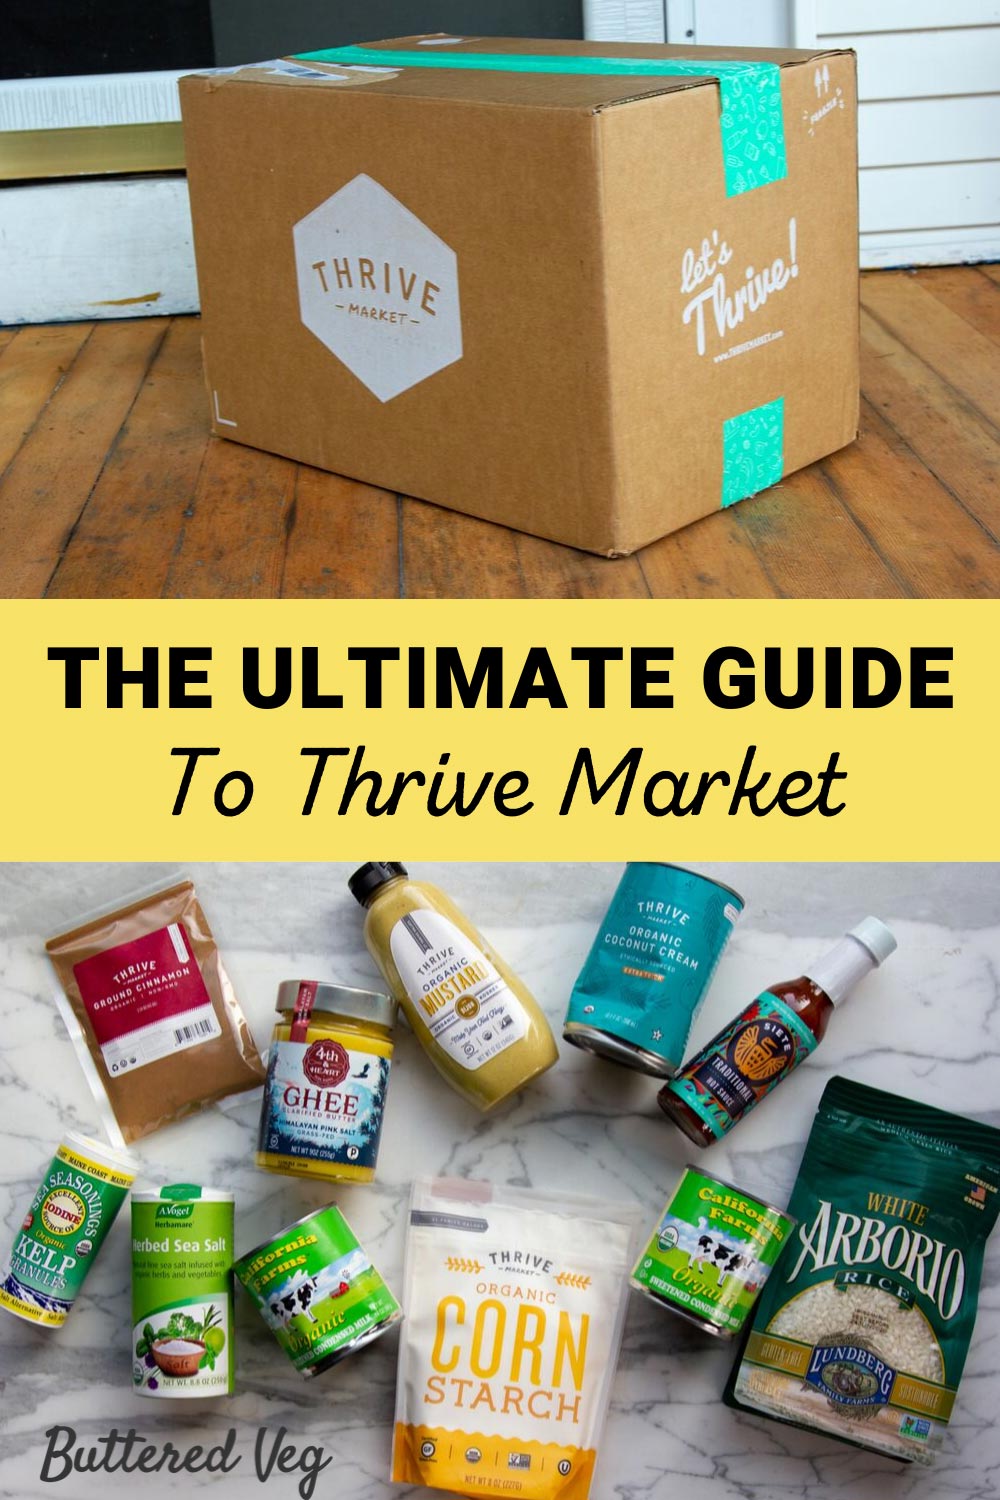 The Ultimate Guide To Shopping At Thrive Market